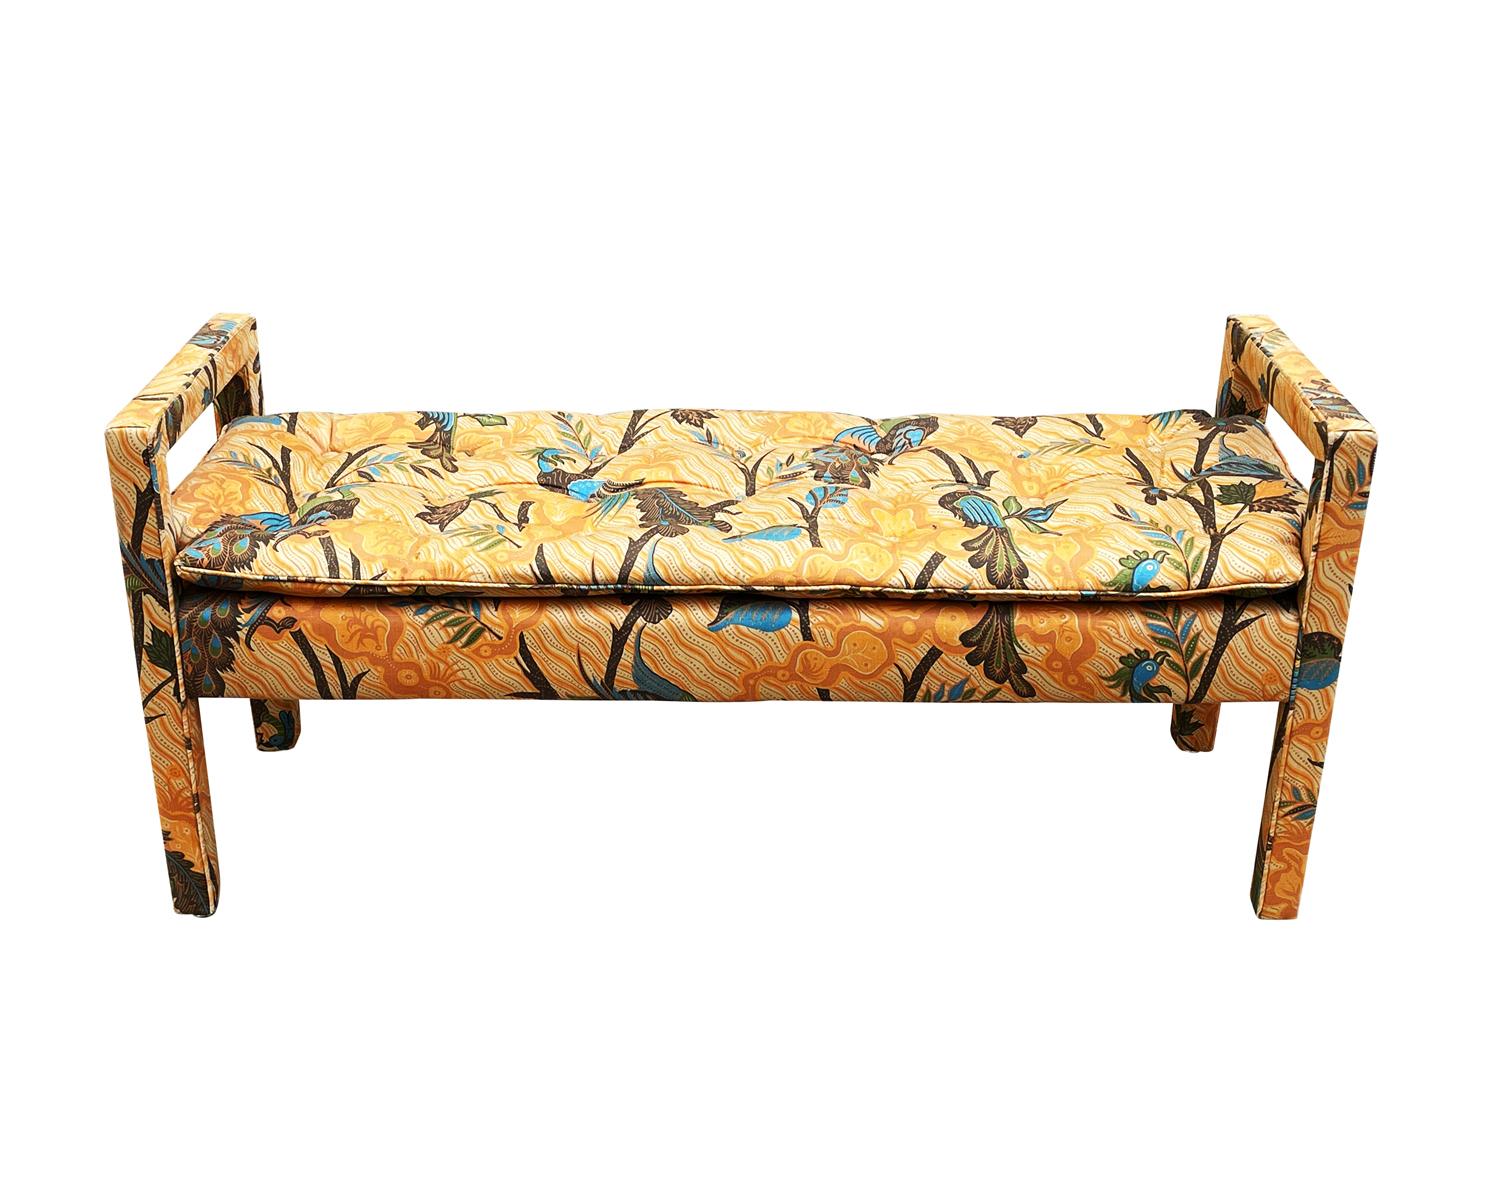 North American Mid-Century Modern Upholstered Parsons Style Bench or Ottoman